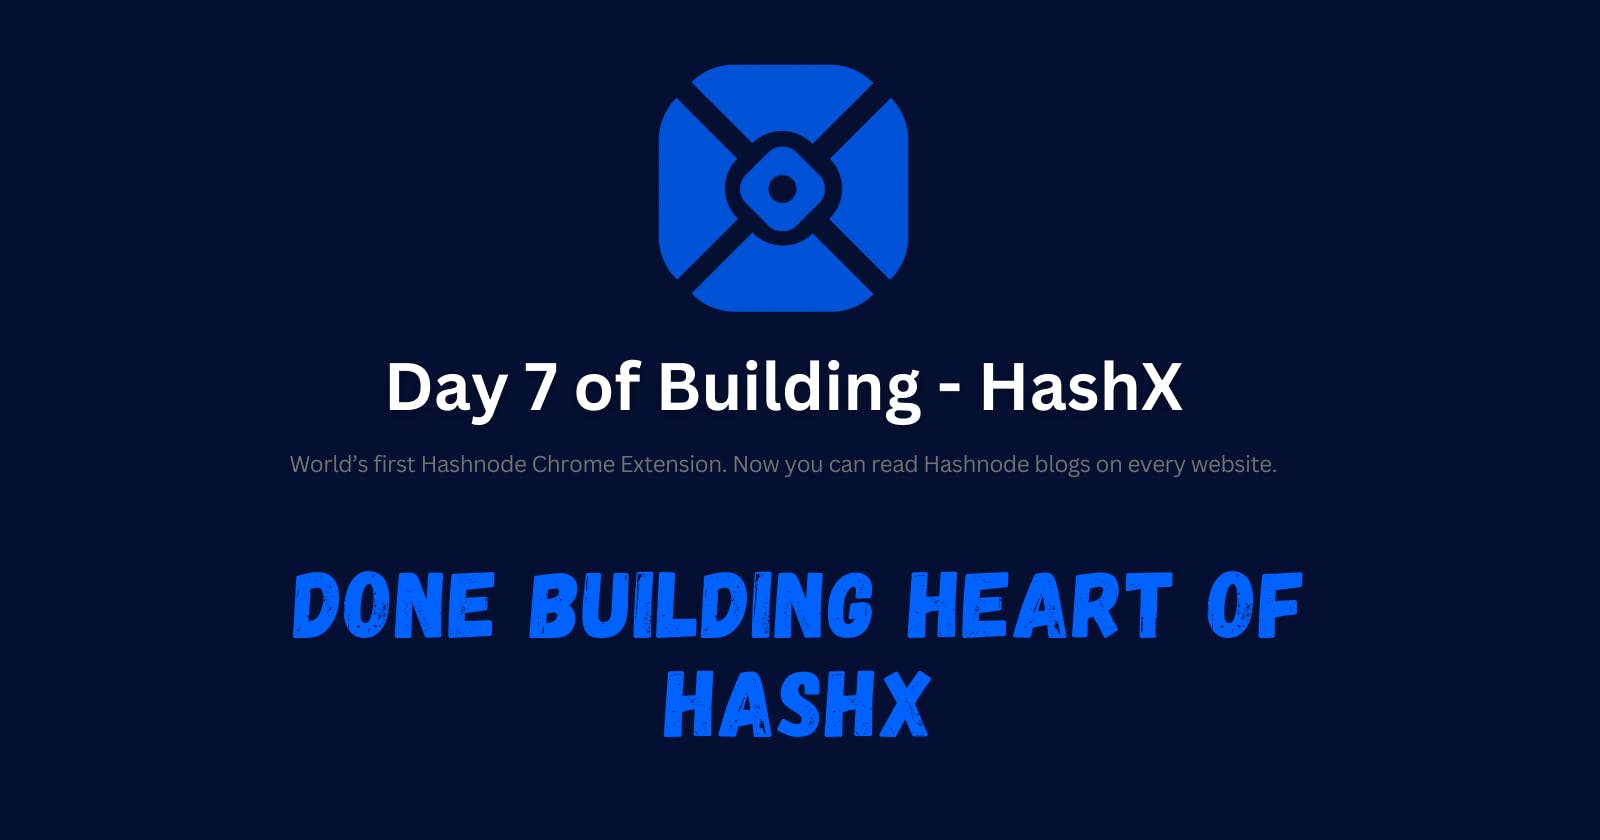 Day 7 - Done building Heart of HashX